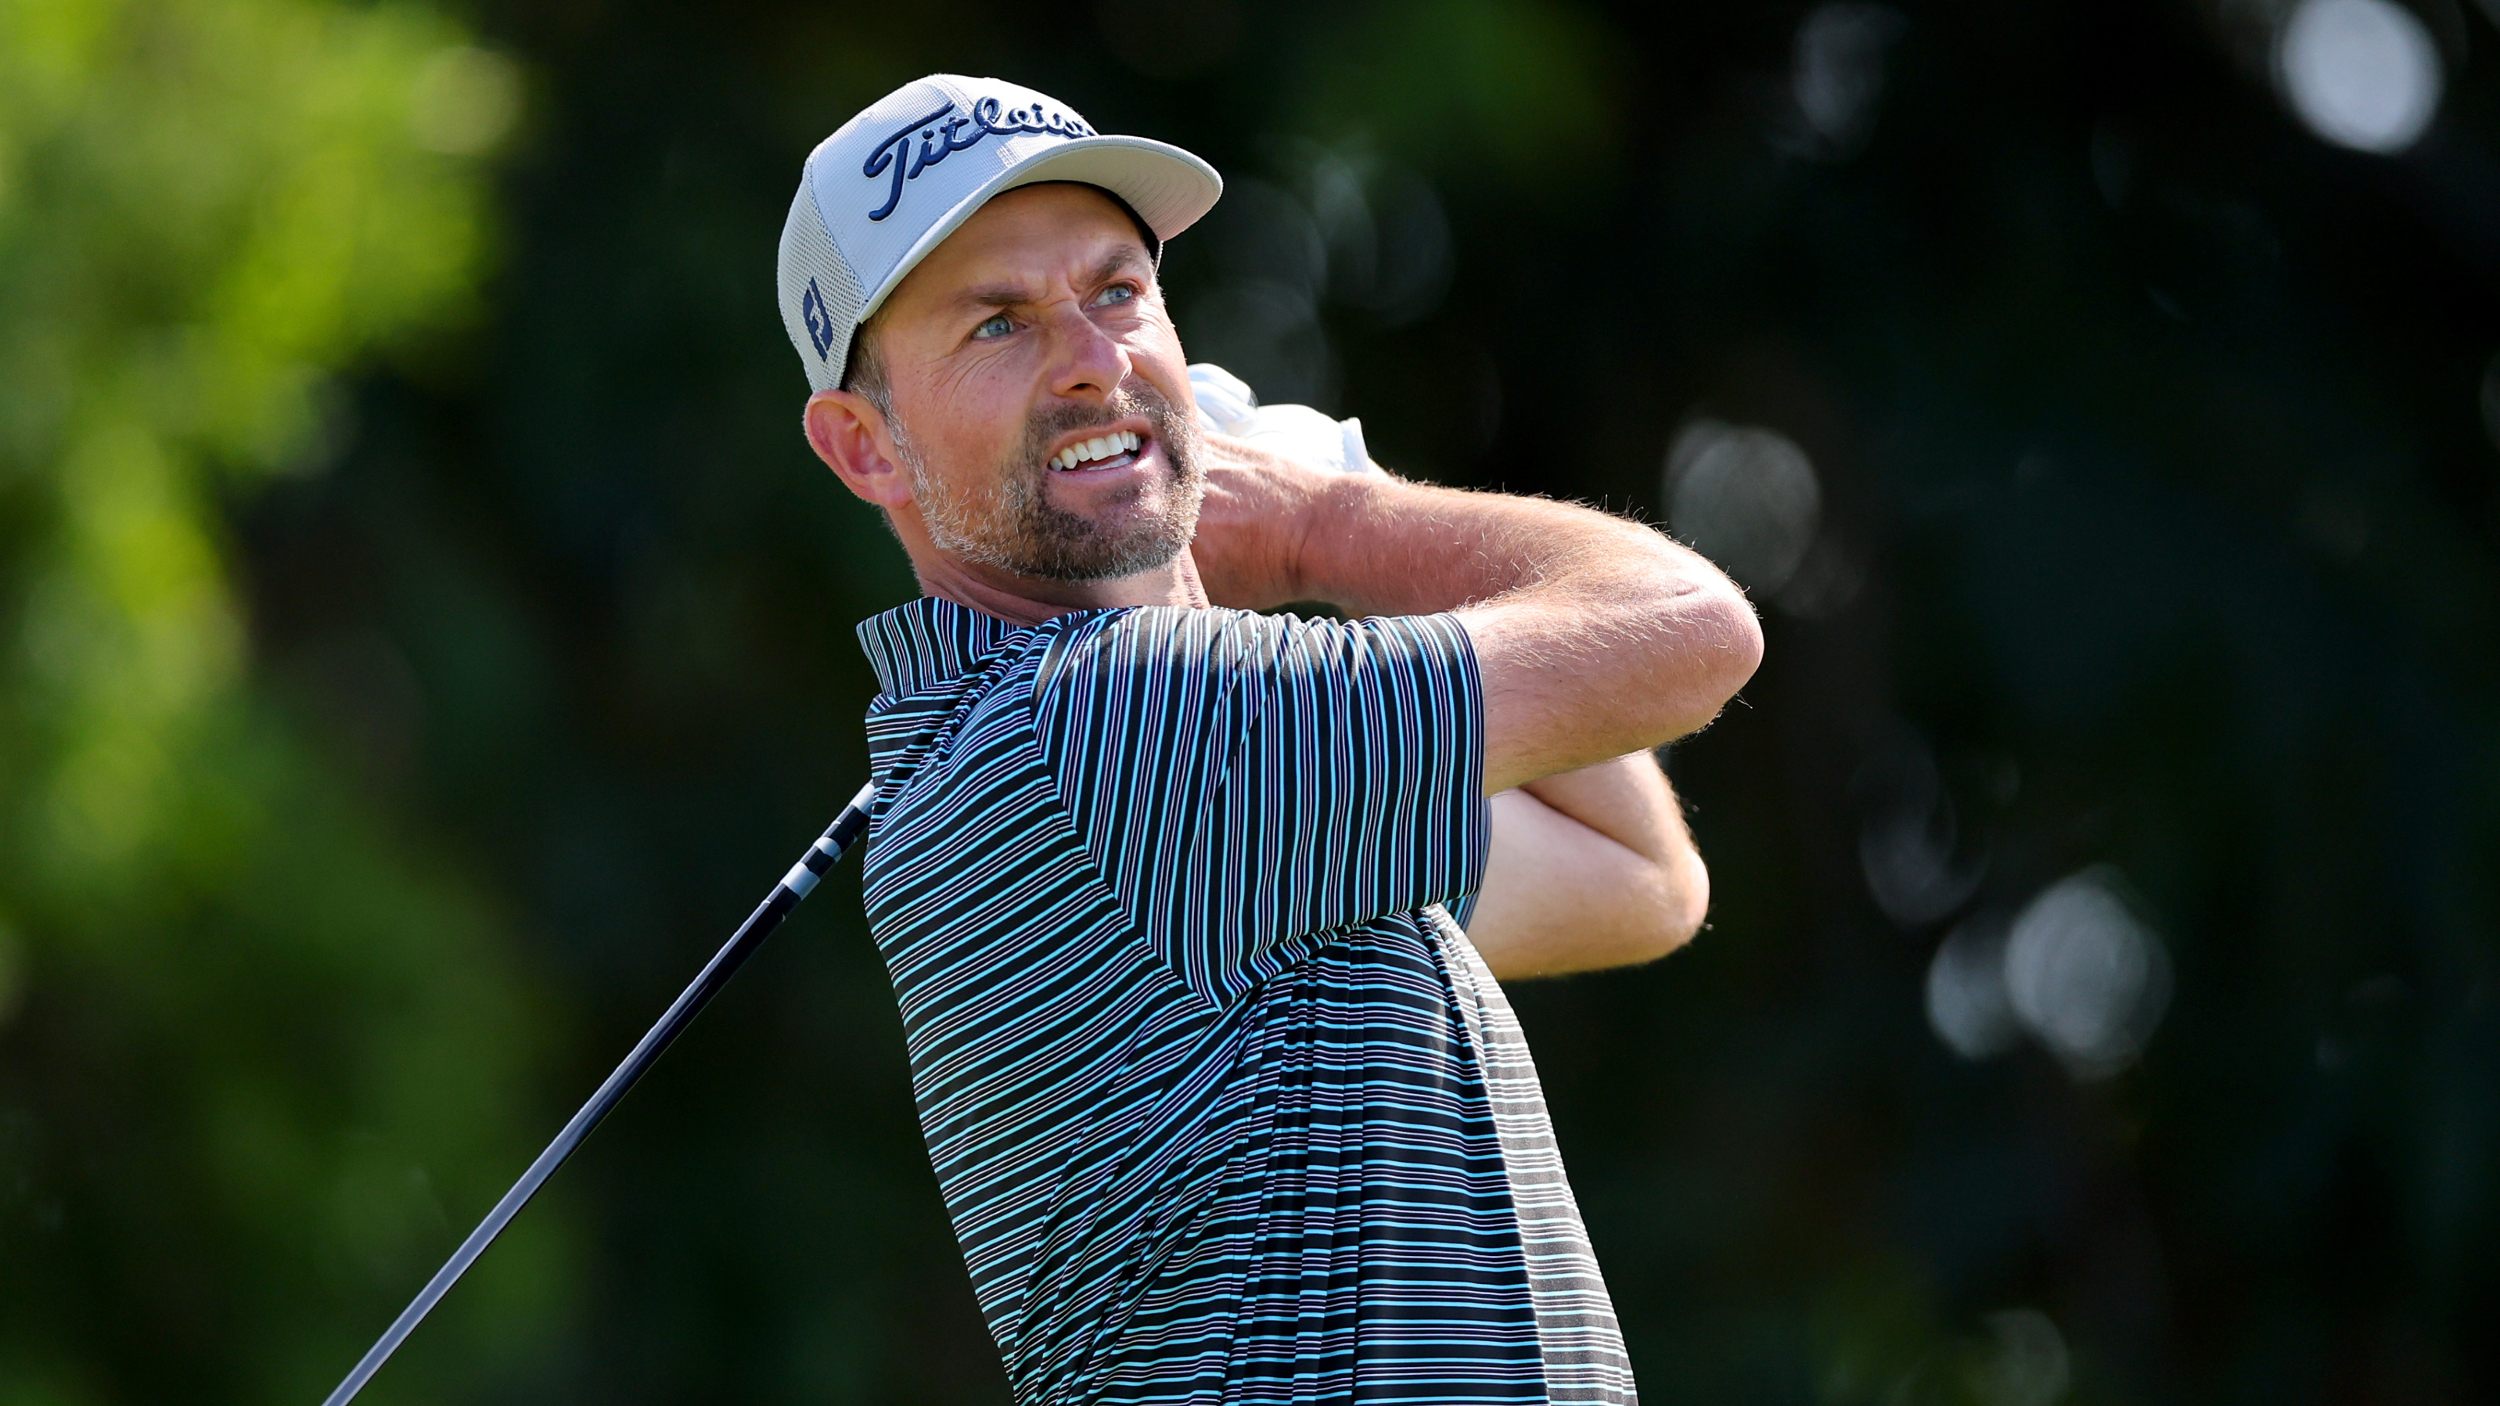 'it has nothing to do with me being on the board' - webb simpson responds to criticism of his latest sponsor's invite